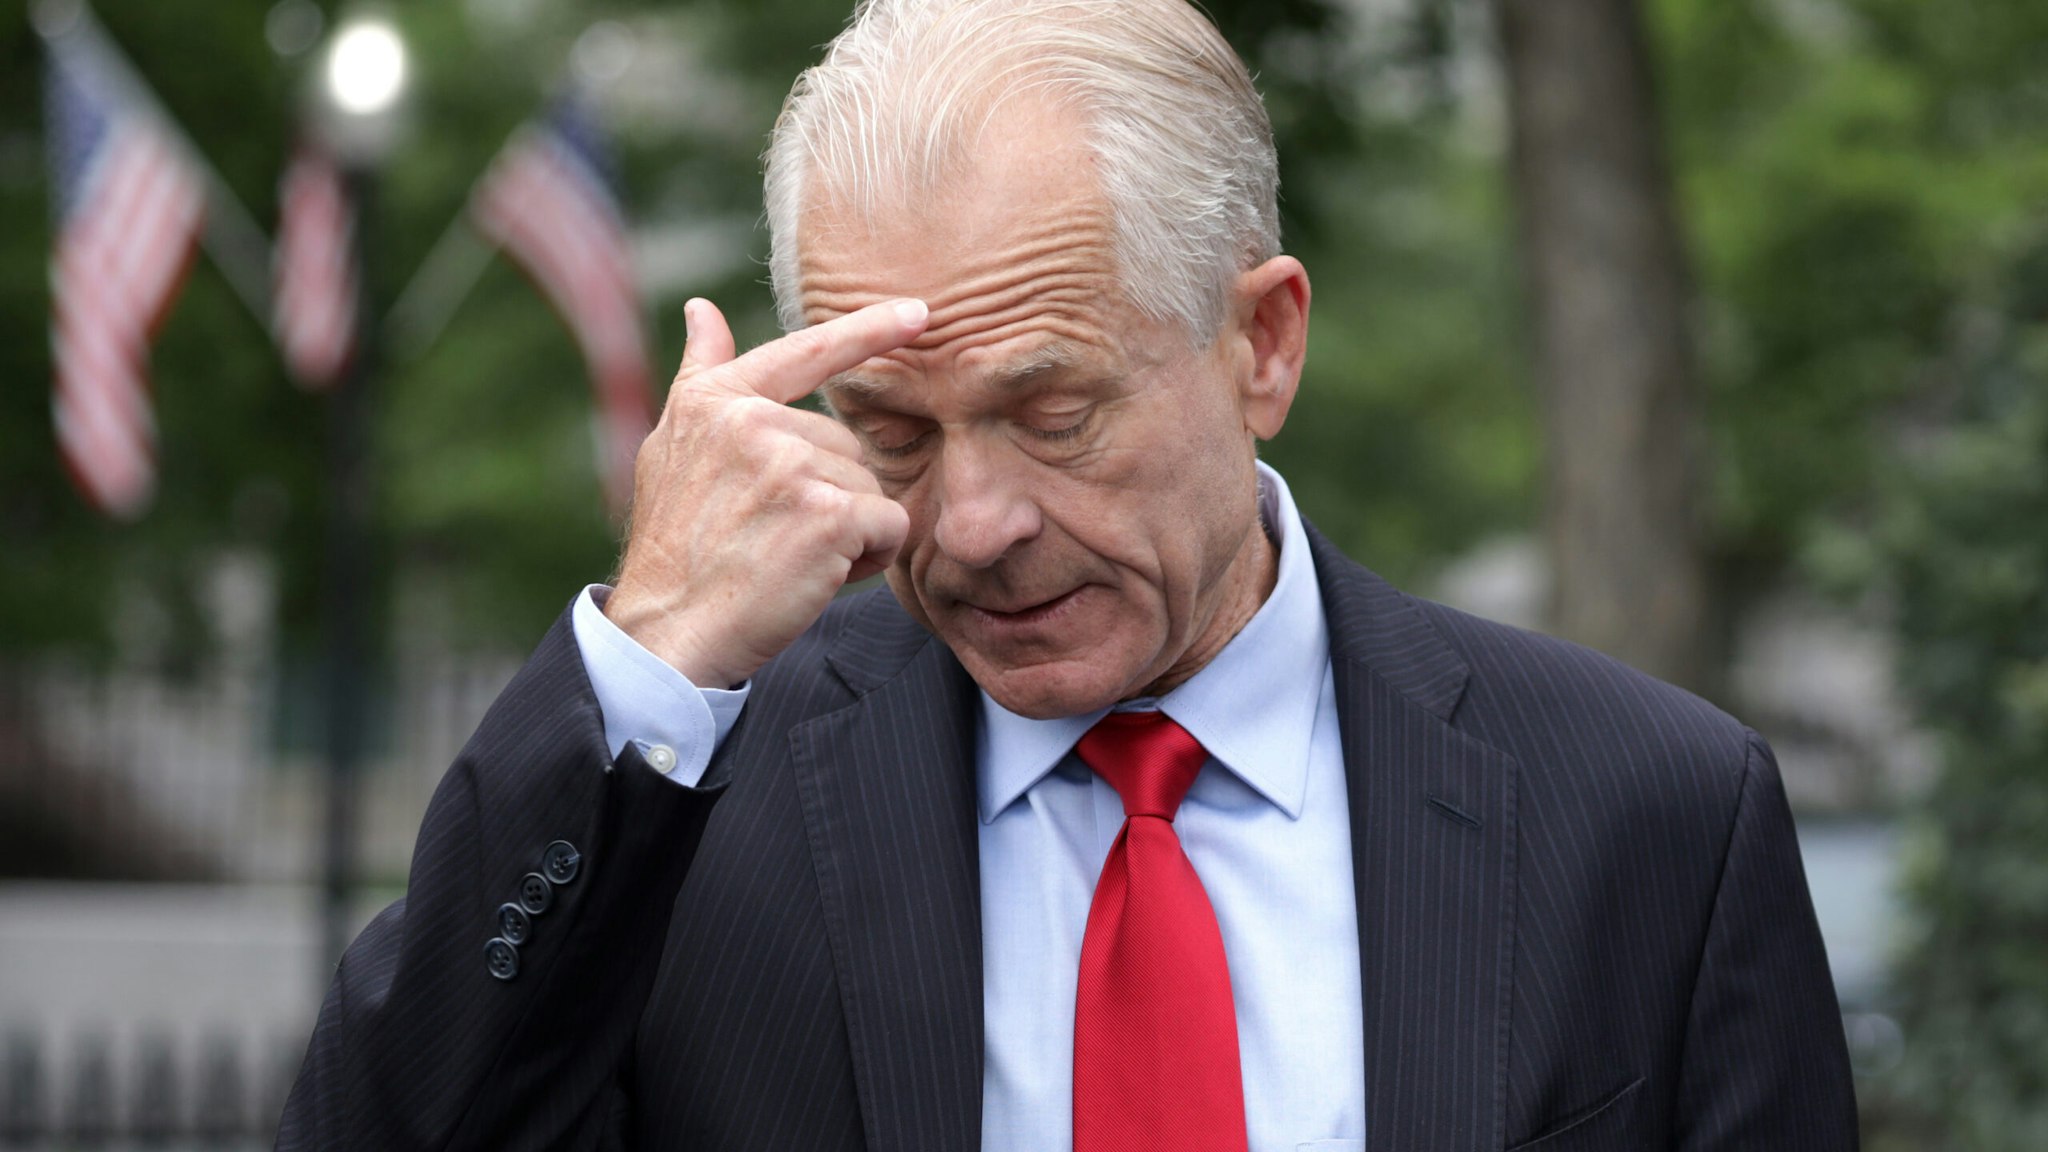 WASHINGTON, DC - JUNE 18: Director of Trade and Manufacturing Policy Peter Navarro speaks to members of the press outside the West Wing of the White House June 18, 2020 in Washington, DC. Navarro spoke on former National Security Adviser John Bolton’s new book “The Room Where It Happened.” (Photo by Alex Wong/Getty Images)